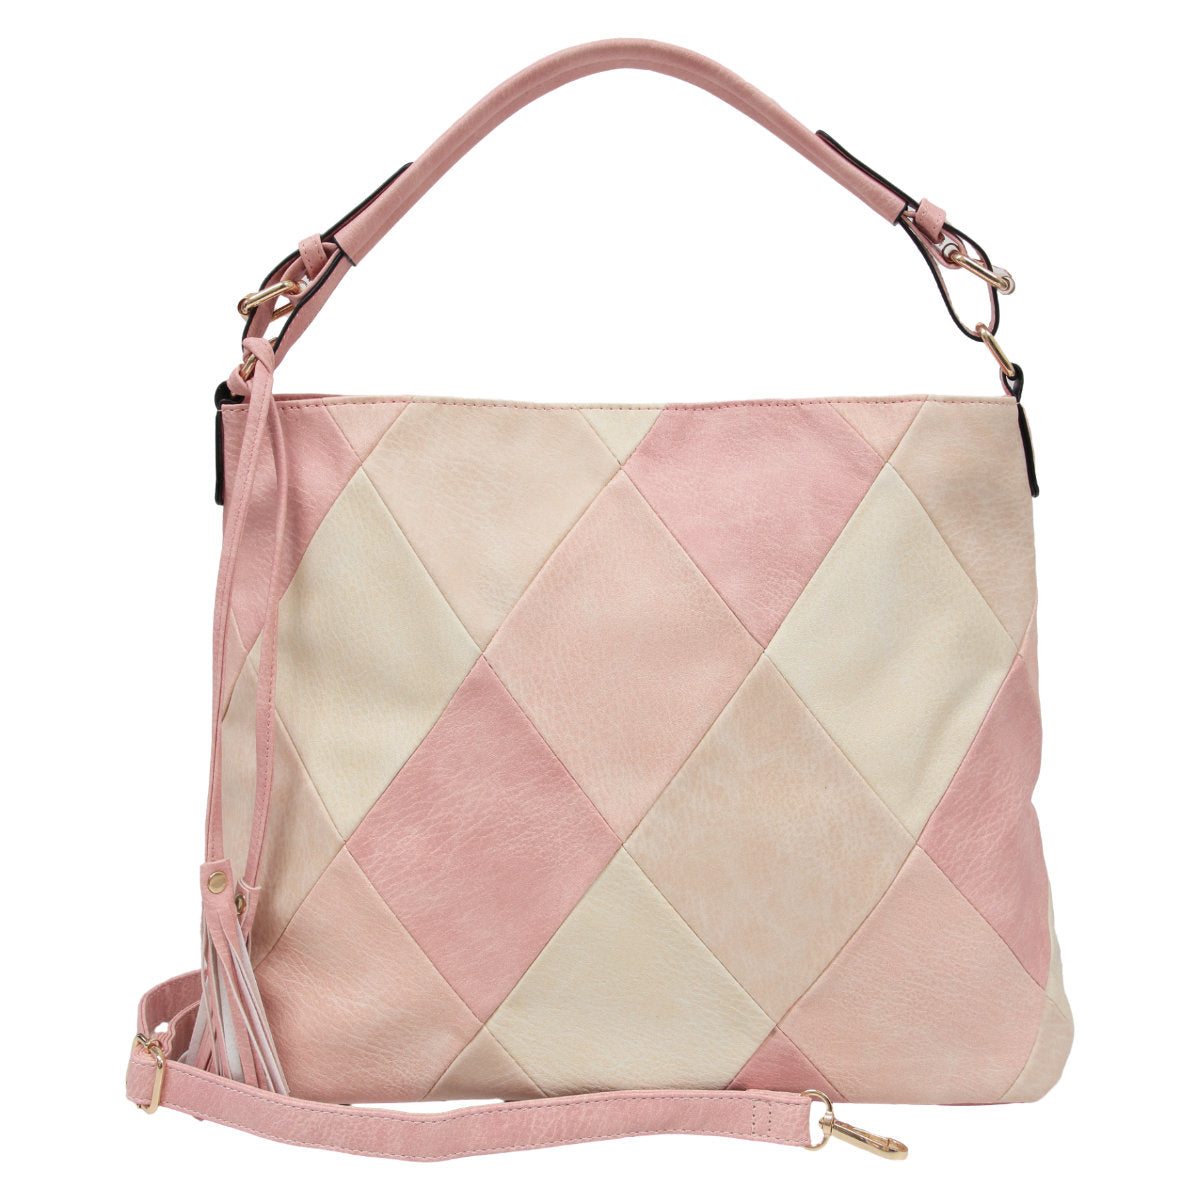 Harley Quin Shoulder Bag: Eye catching patchwork, diamond shaped front-pattern with double tassel. Soft gold hardware attaches shoulder handles and crossbody handle
Features: 

Dark interior  - Ciao Bella Dresses 